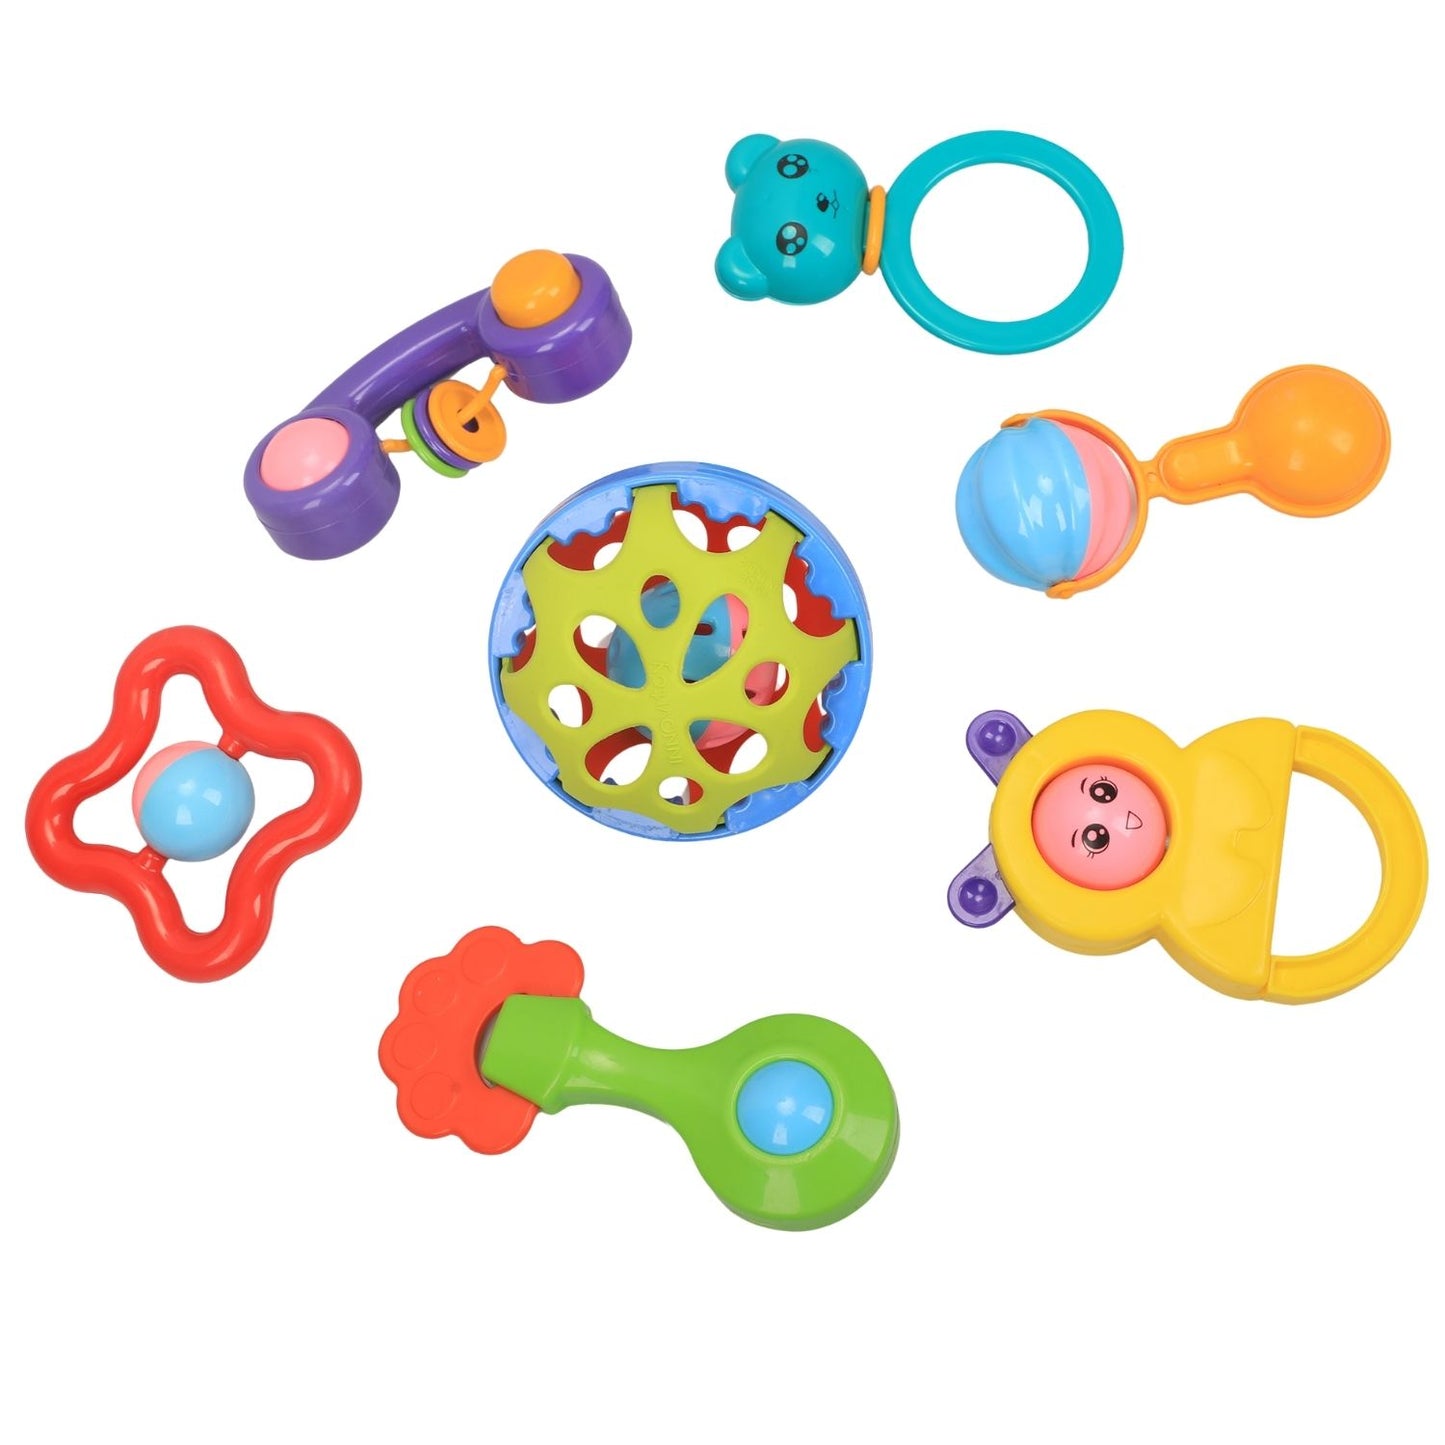 MM TOYS Infant Rattle Toys Rattles Pack includes 7 non-toxic, BPA-free Rattle toys Designed For Infants aged New Born 0-6-12 months No Sharp Edges- Multicolor